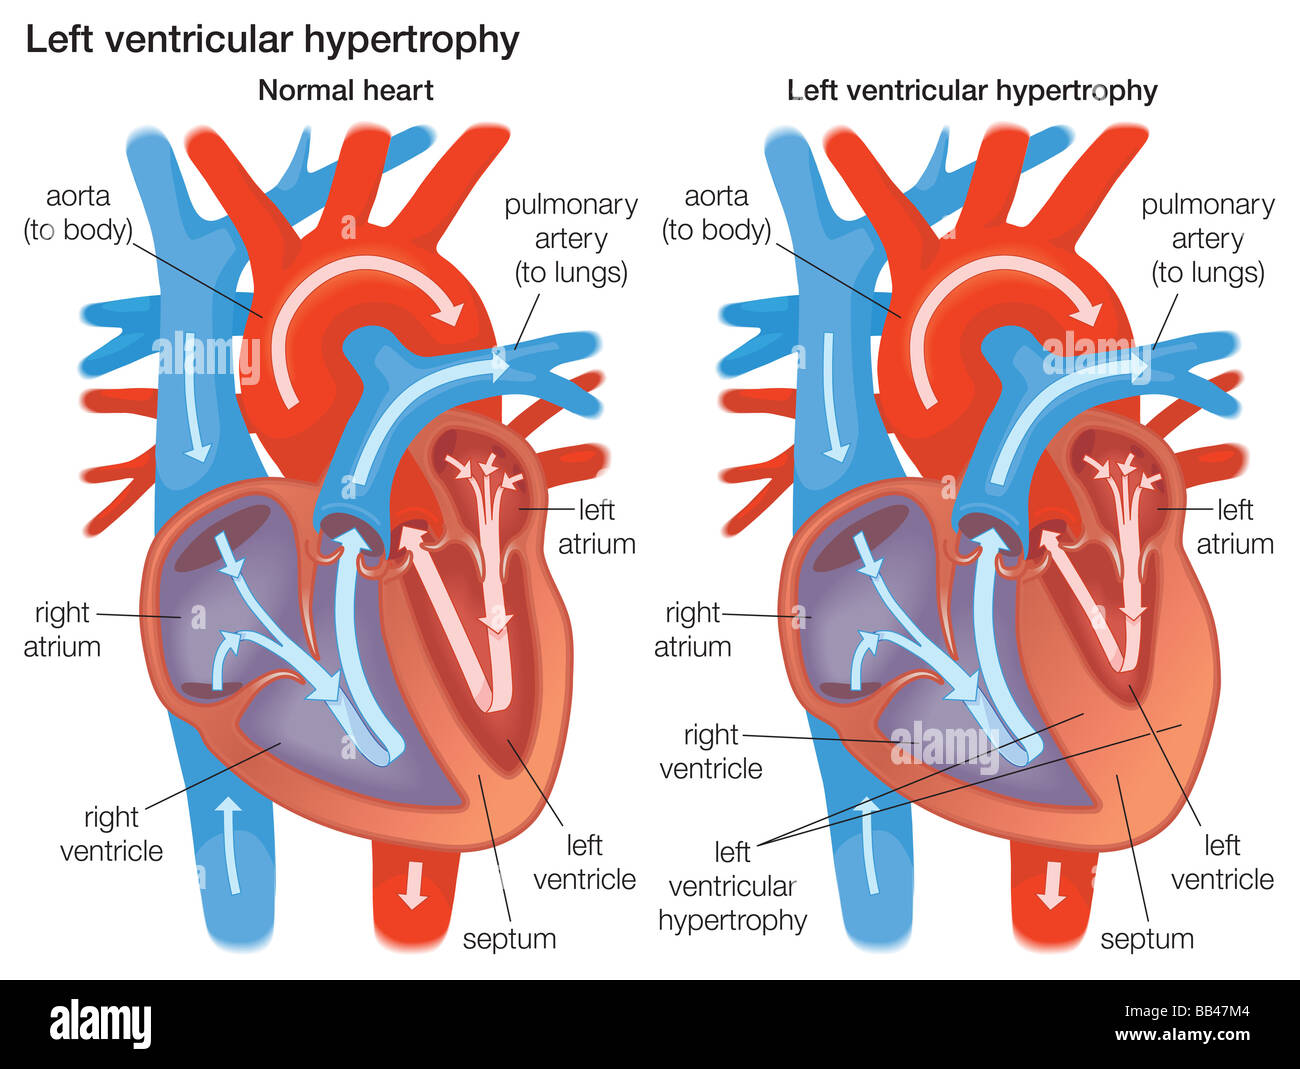 Cross section comparing the left ventricular wall of normal heart to a left ventricular wall that has experienced hypertrophy. Stock Photo